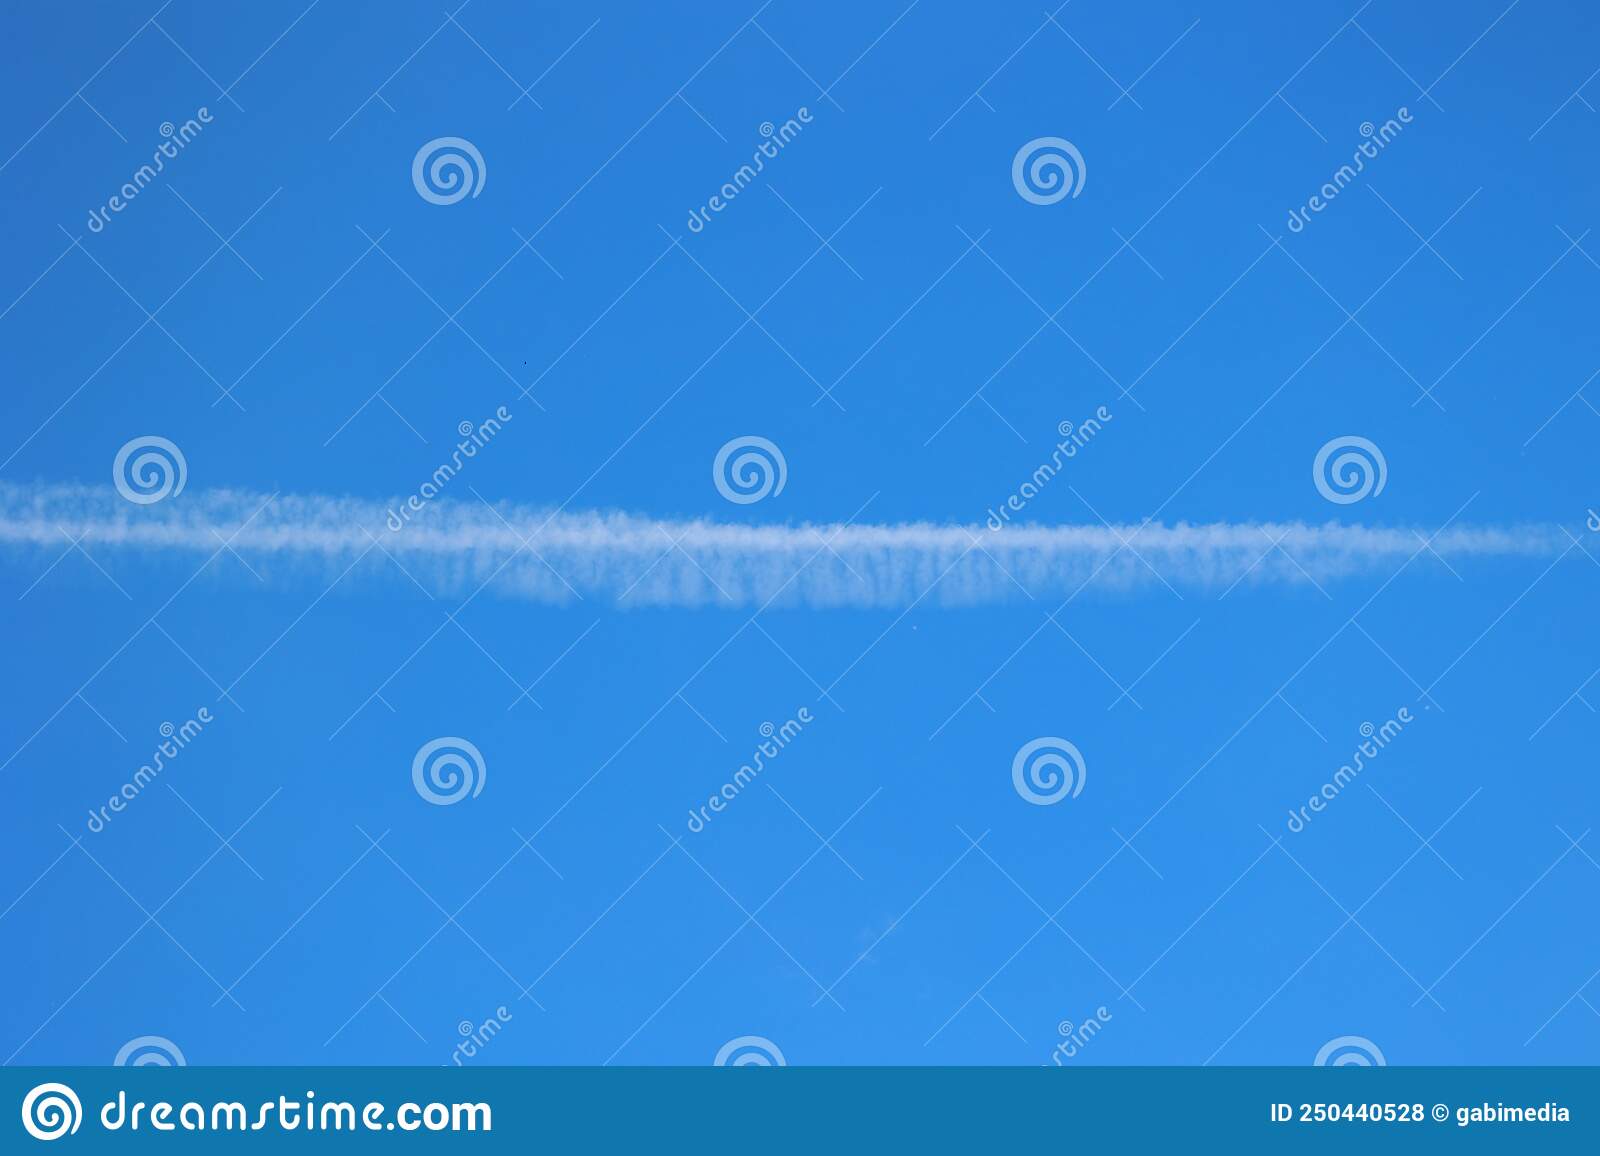 Nice day with blue sky and a cloud made by the engine of an airplane